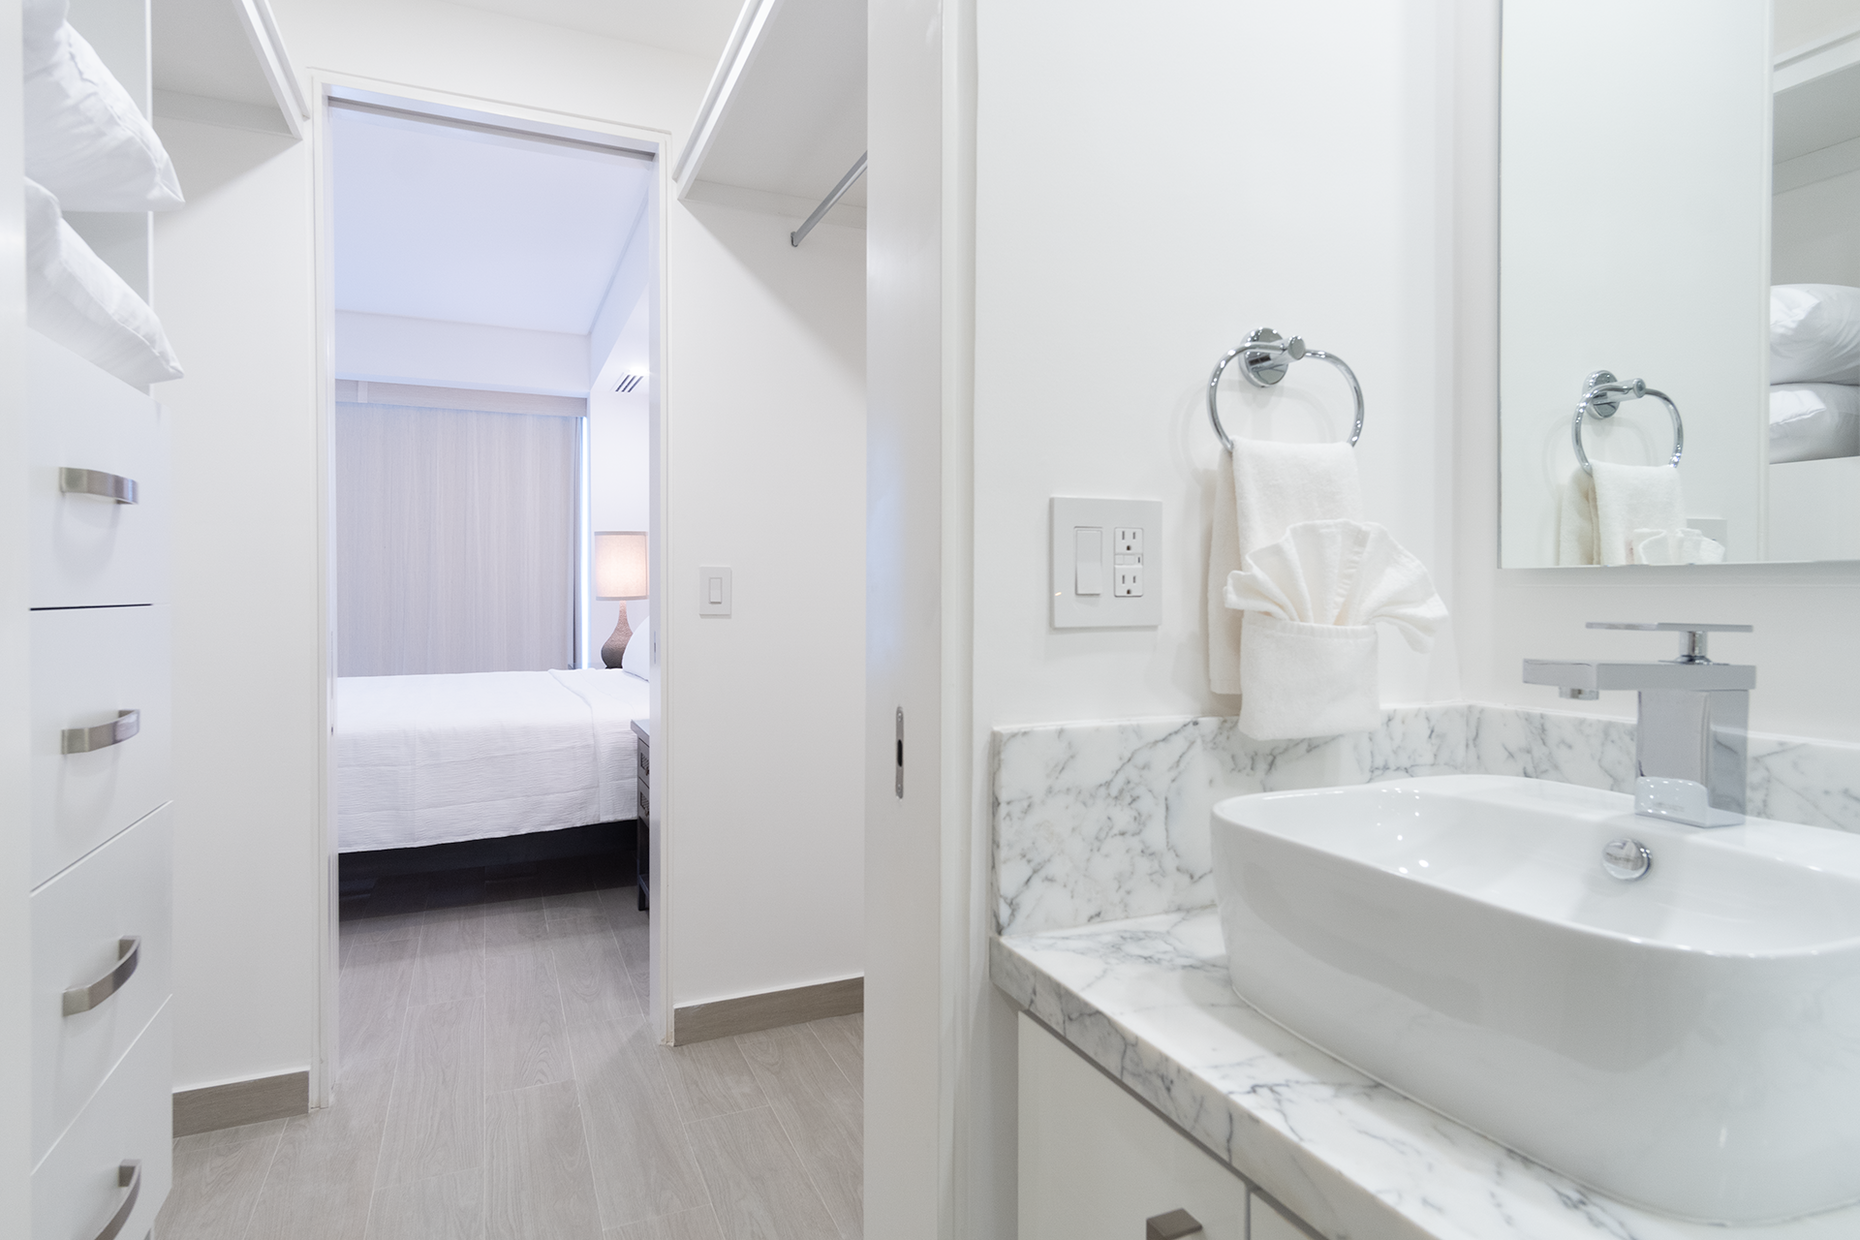 The bedroom in this unit is a suite with an attached bathroom and walk-in closet.